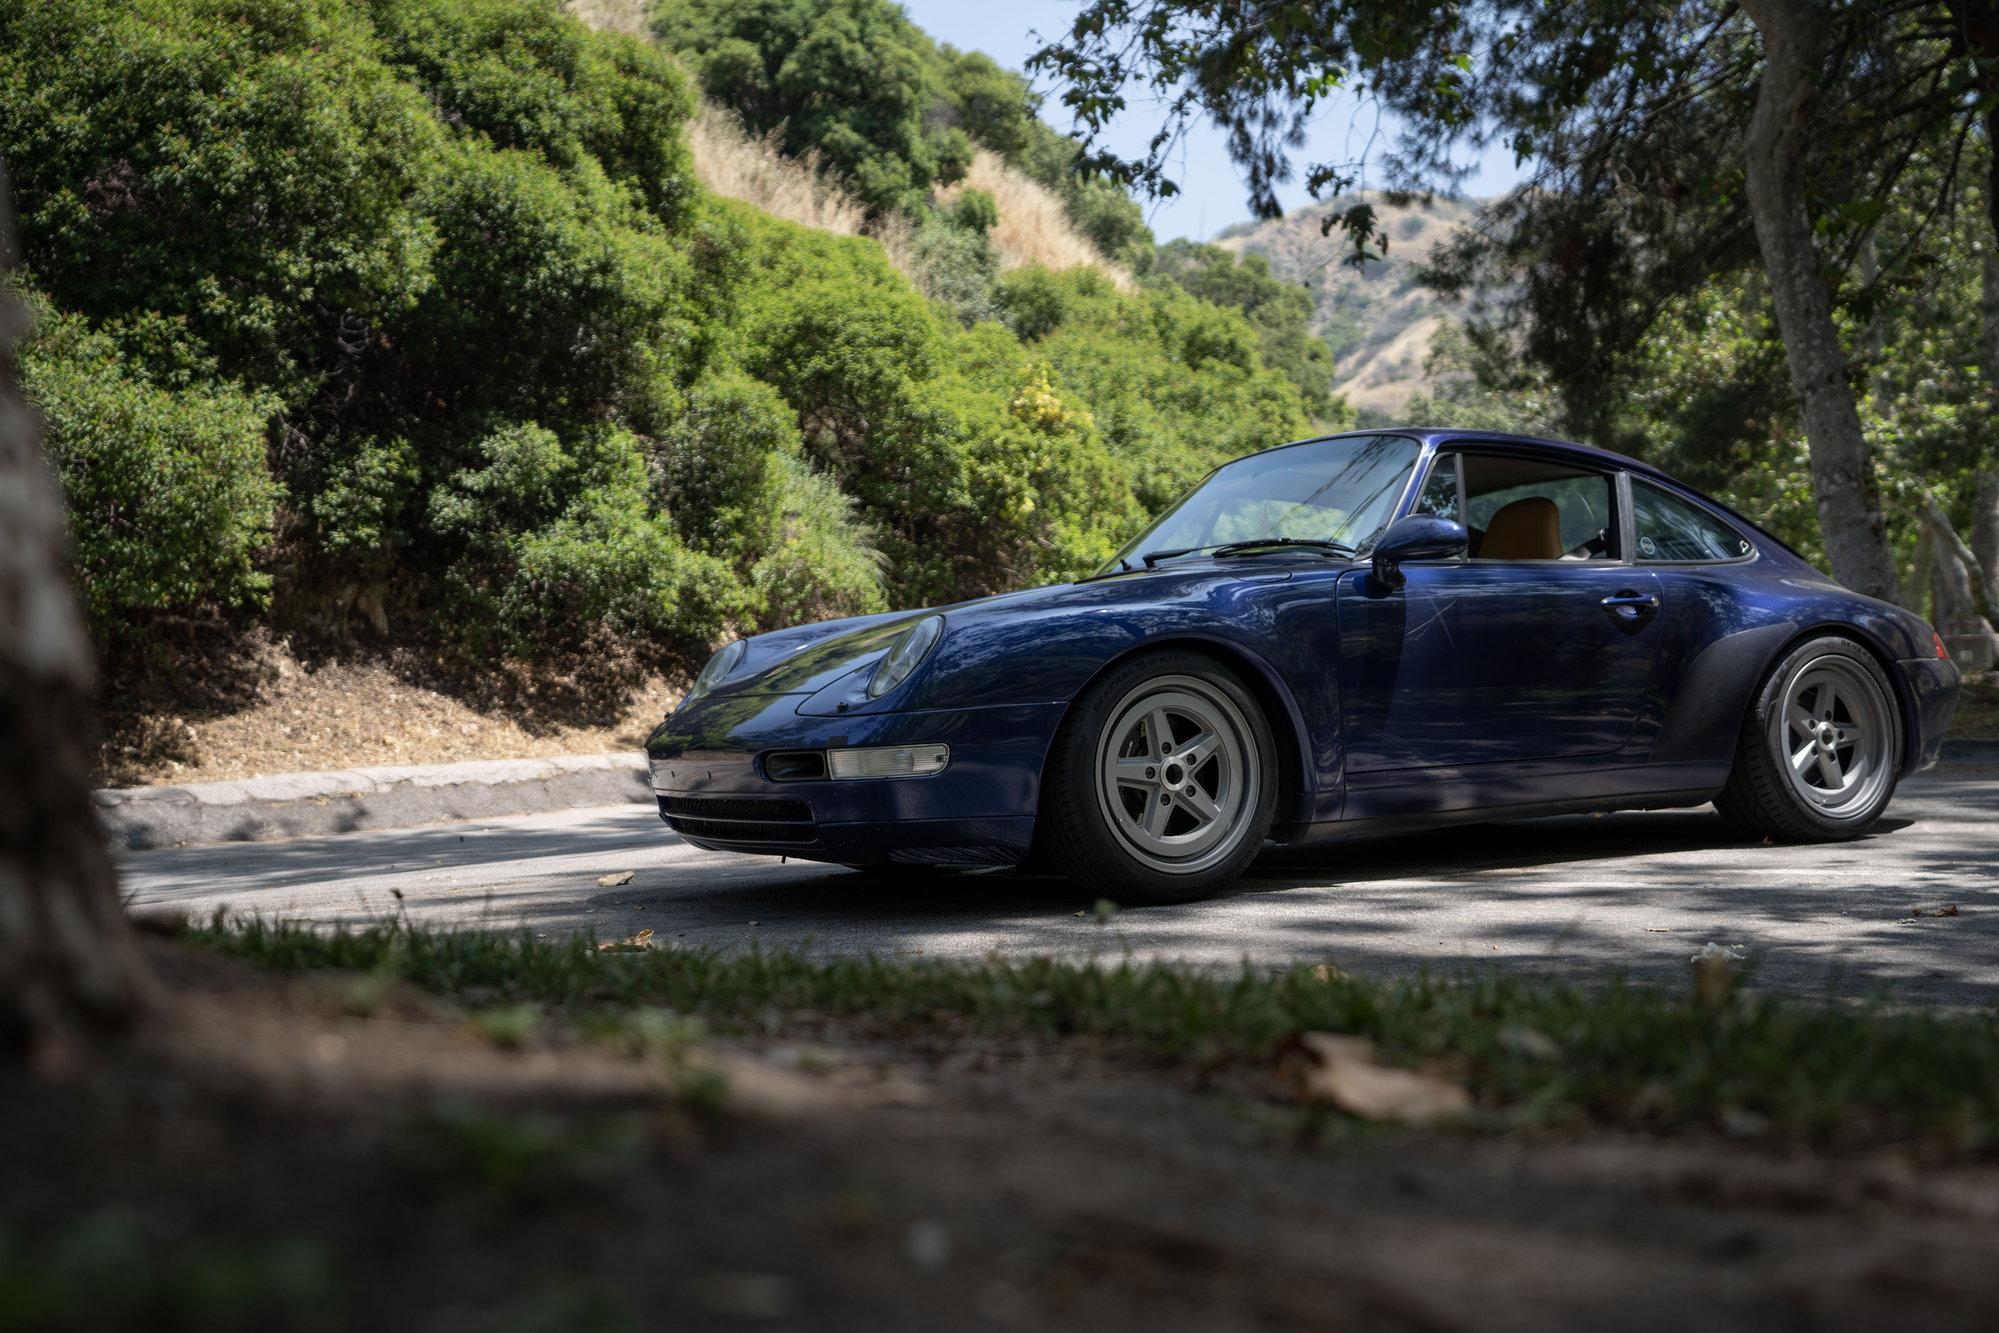 Wheels and Tires/Axles - Fifteen52 17" forged 2pc Outlaw 003 wheels // custom 993/964 NB Fitment - Used - 1989 to 1997 Porsche 911 - Burbank, CA 91506, United States